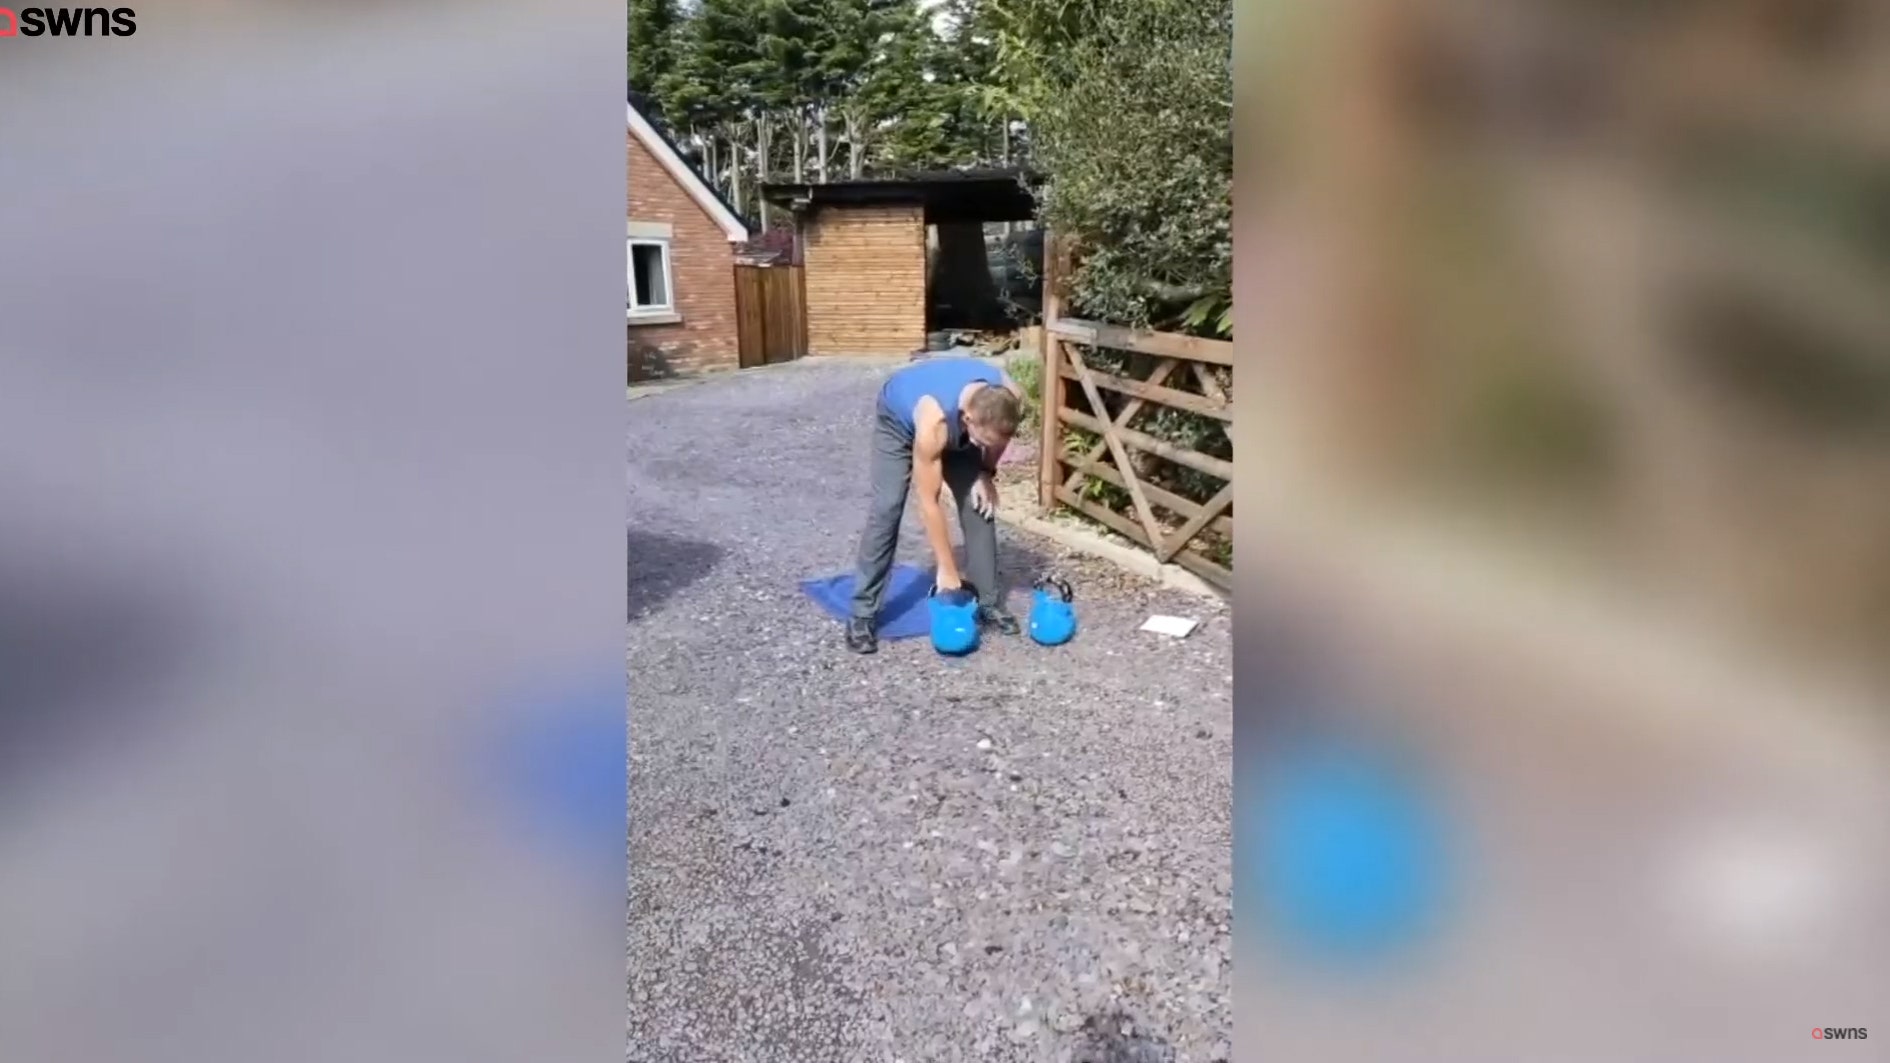 64-year-old grandfather completes 10,000 kettlebell swings in record time